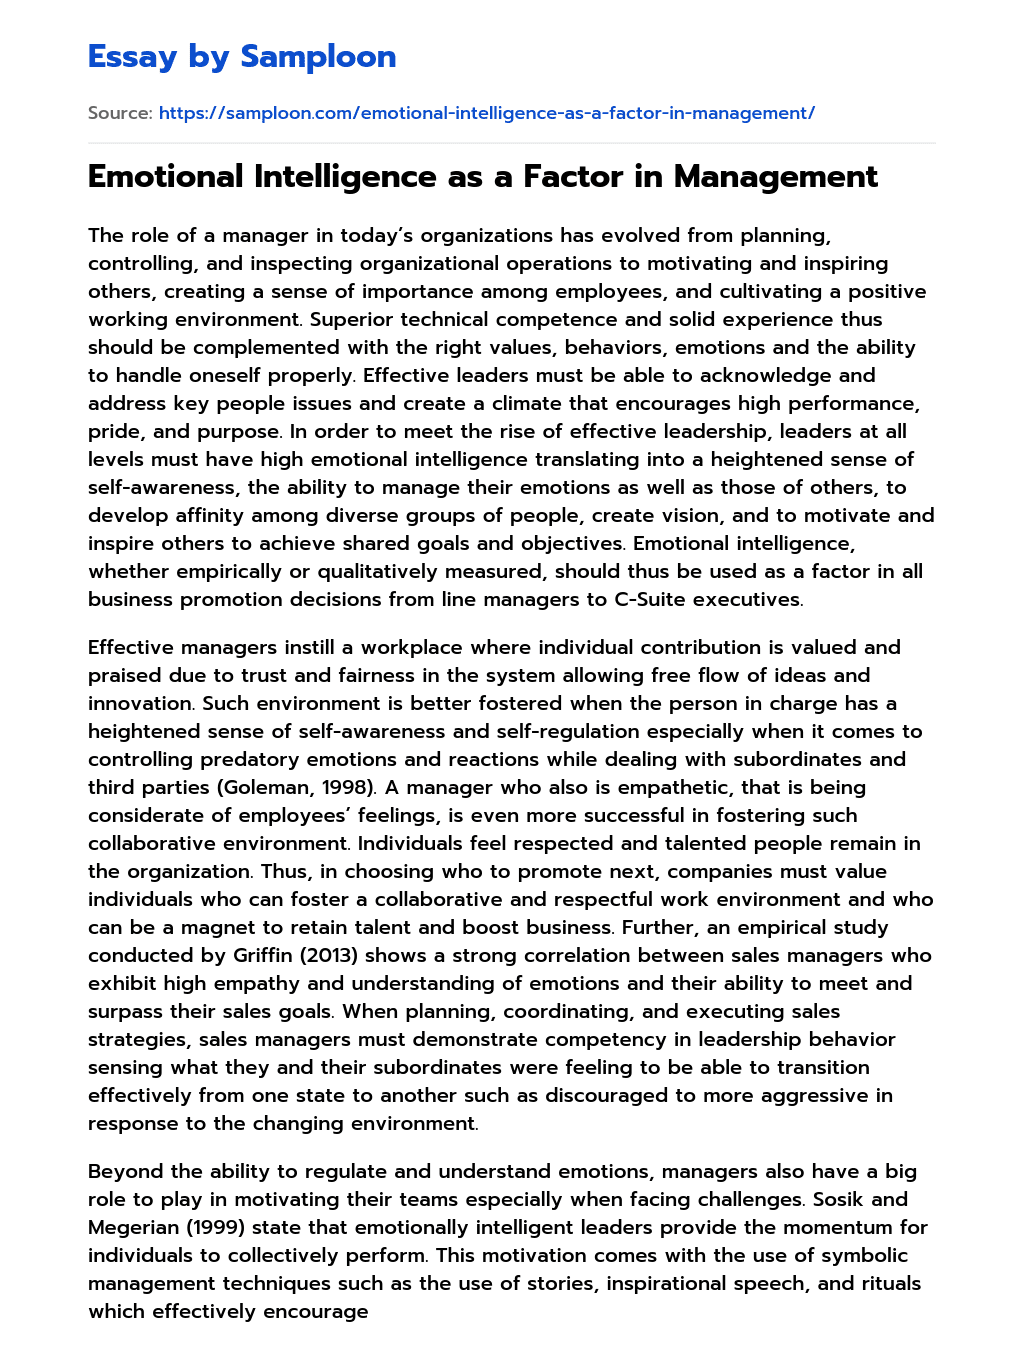 Emotional Intelligence as a Factor in Management essay